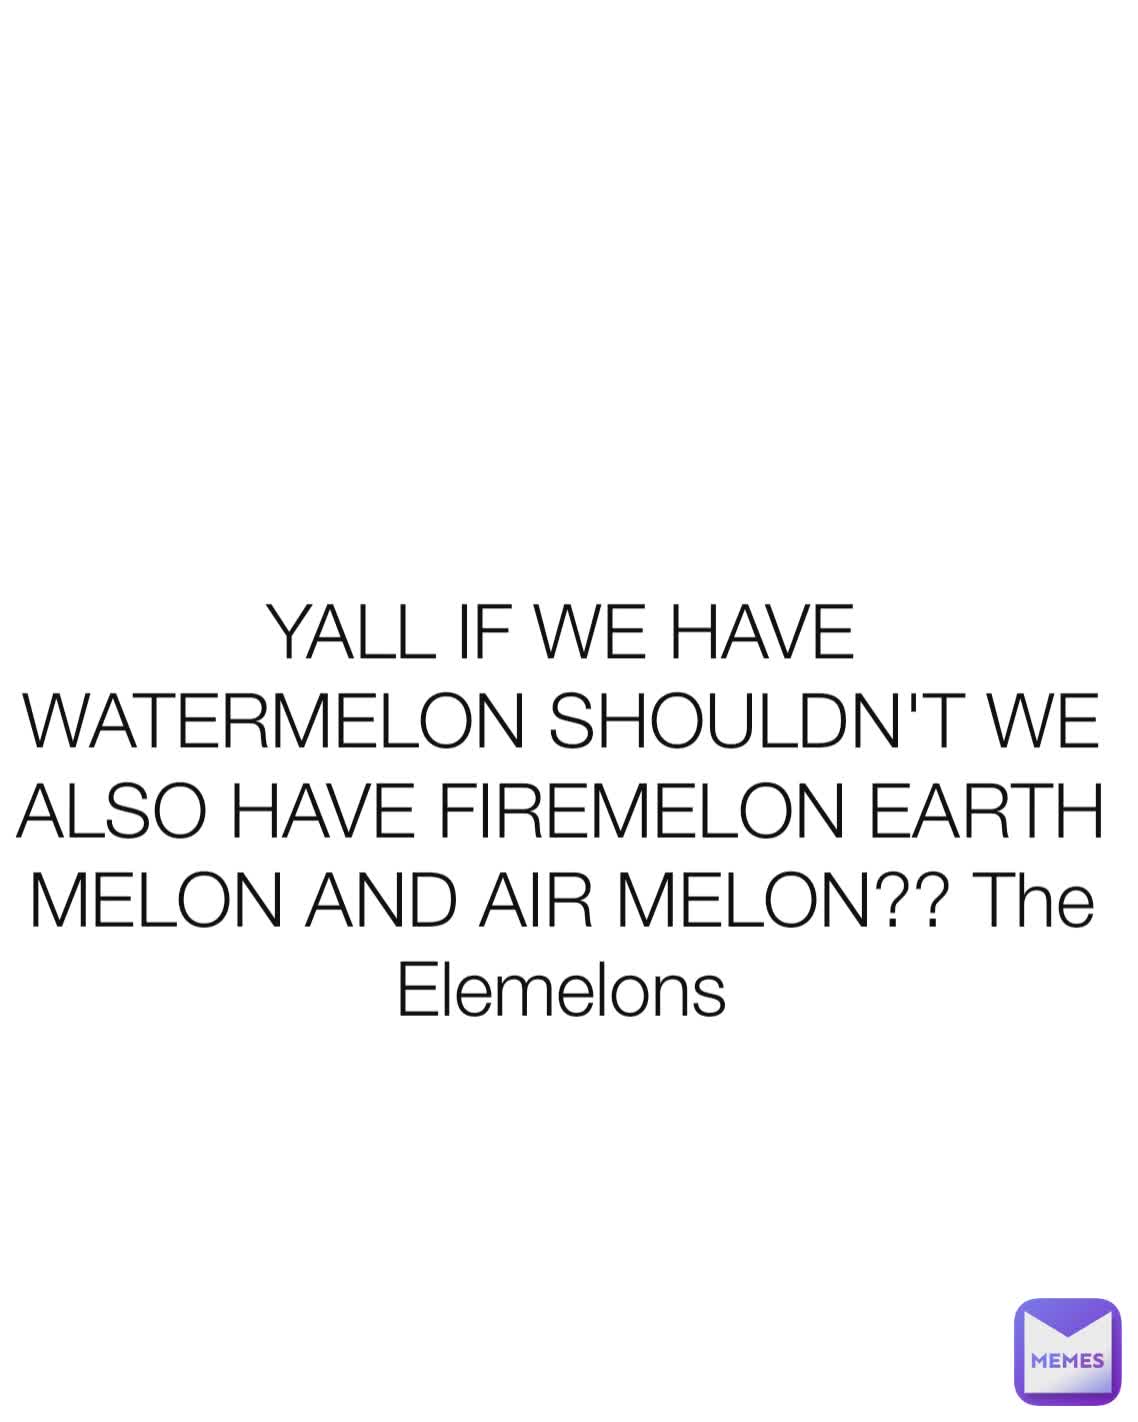 YALL IF WE HAVE WATERMELON SHOULDN'T WE ALSO HAVE FIREMELON EARTH MELON AND AIR MELON?? The Elemelons